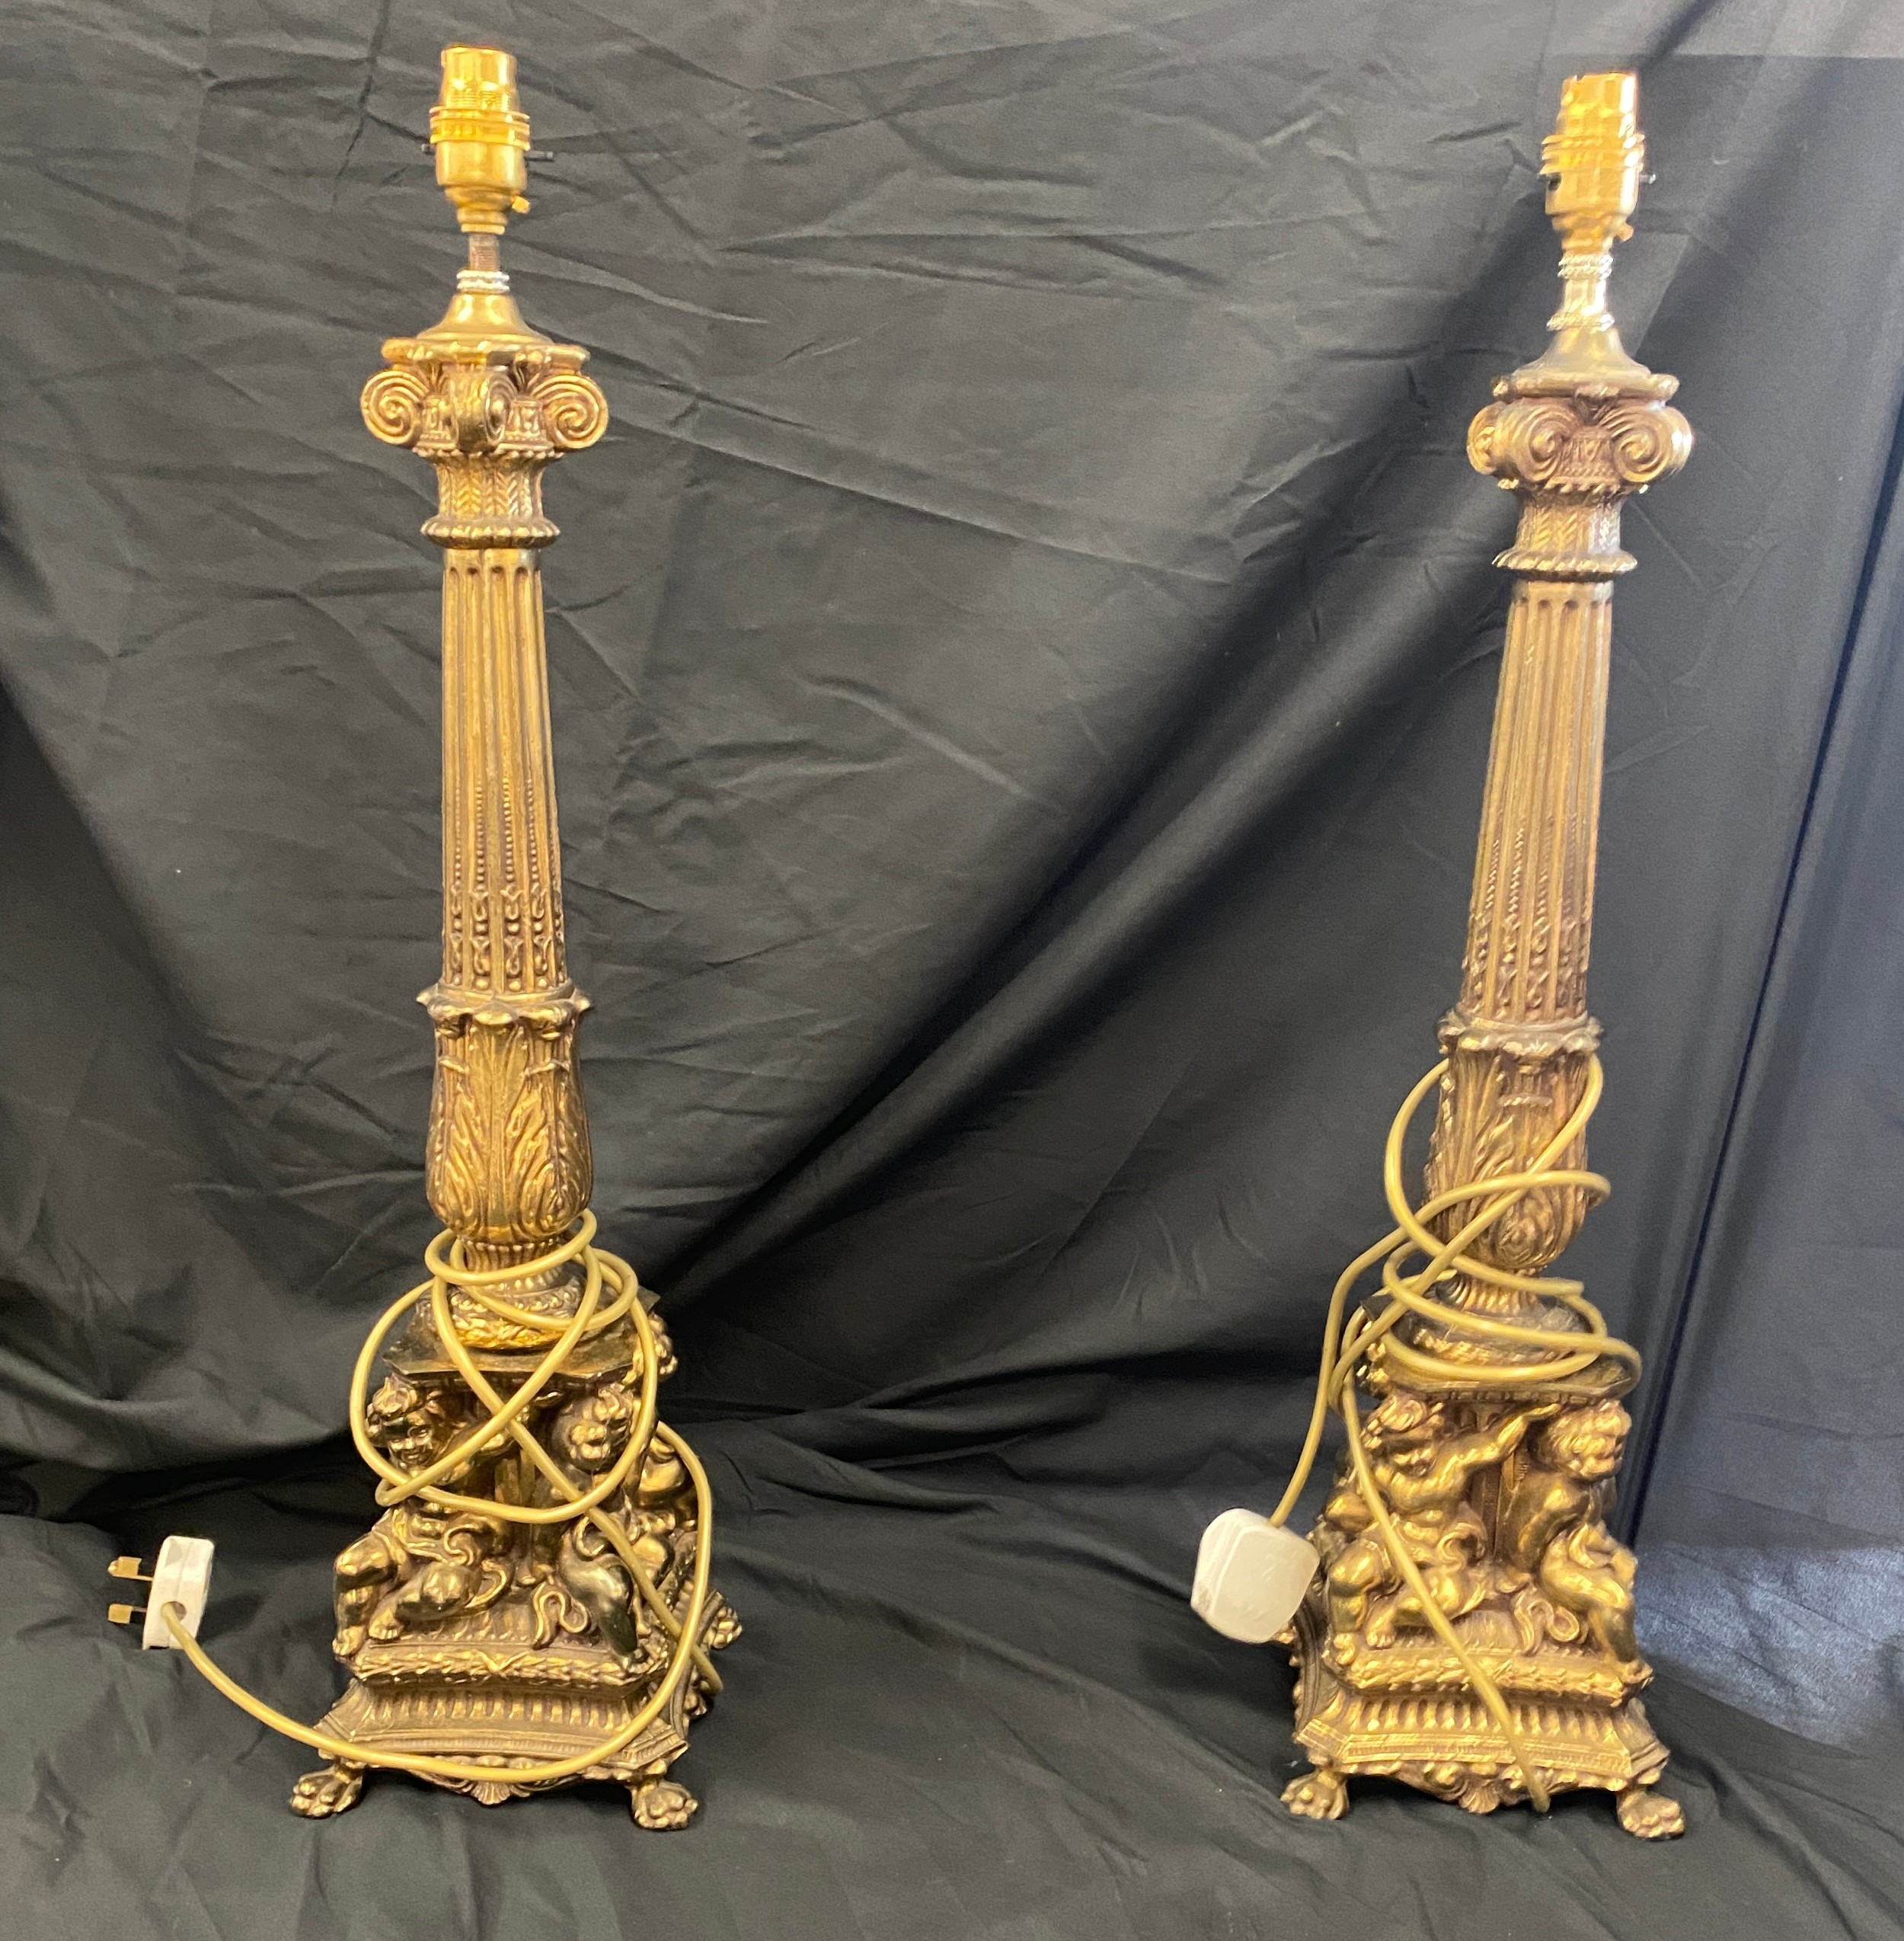 Pair of ornate brass candle sticks, total height 25 inches - Image 2 of 6